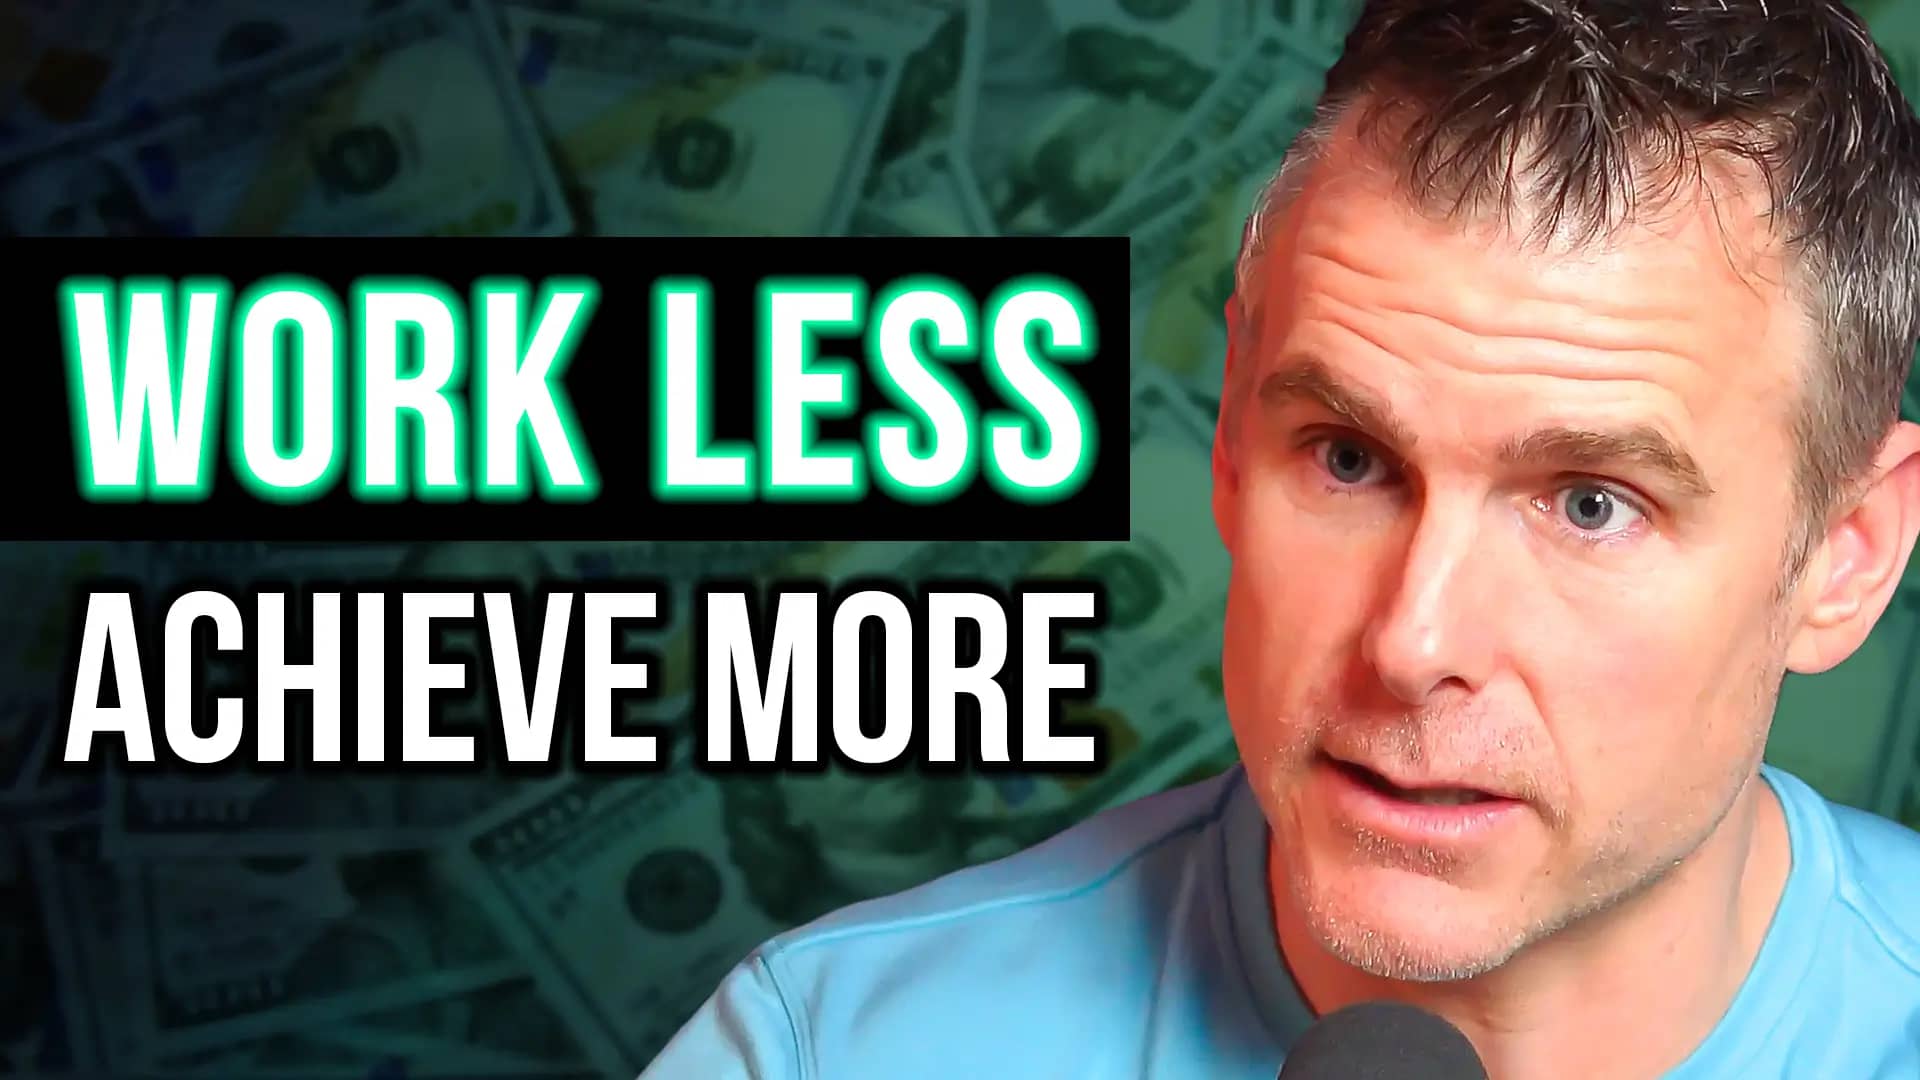 Dan Martell | Buy Back Your Time: Get Unstuck, Reclaim Your Freedom + Build Your Empire